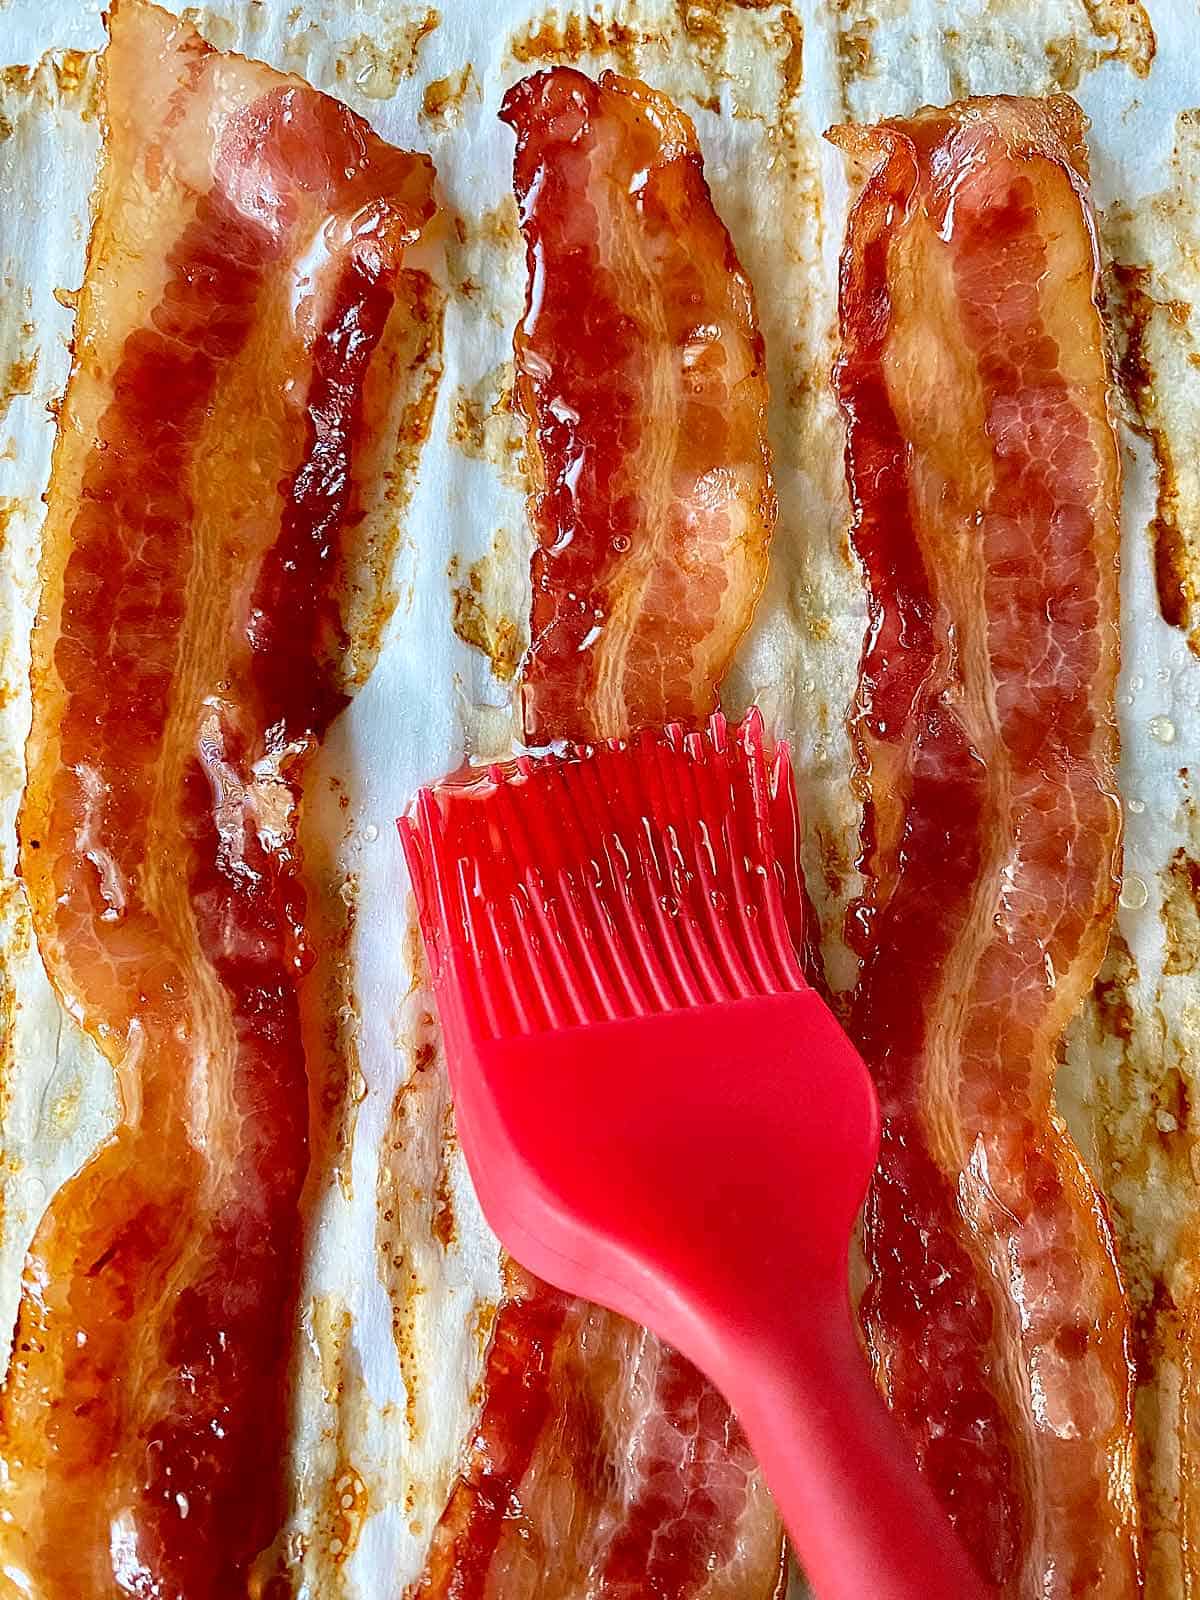 Using a red silicone pastry brush to brush honey glaze on bacon strips.